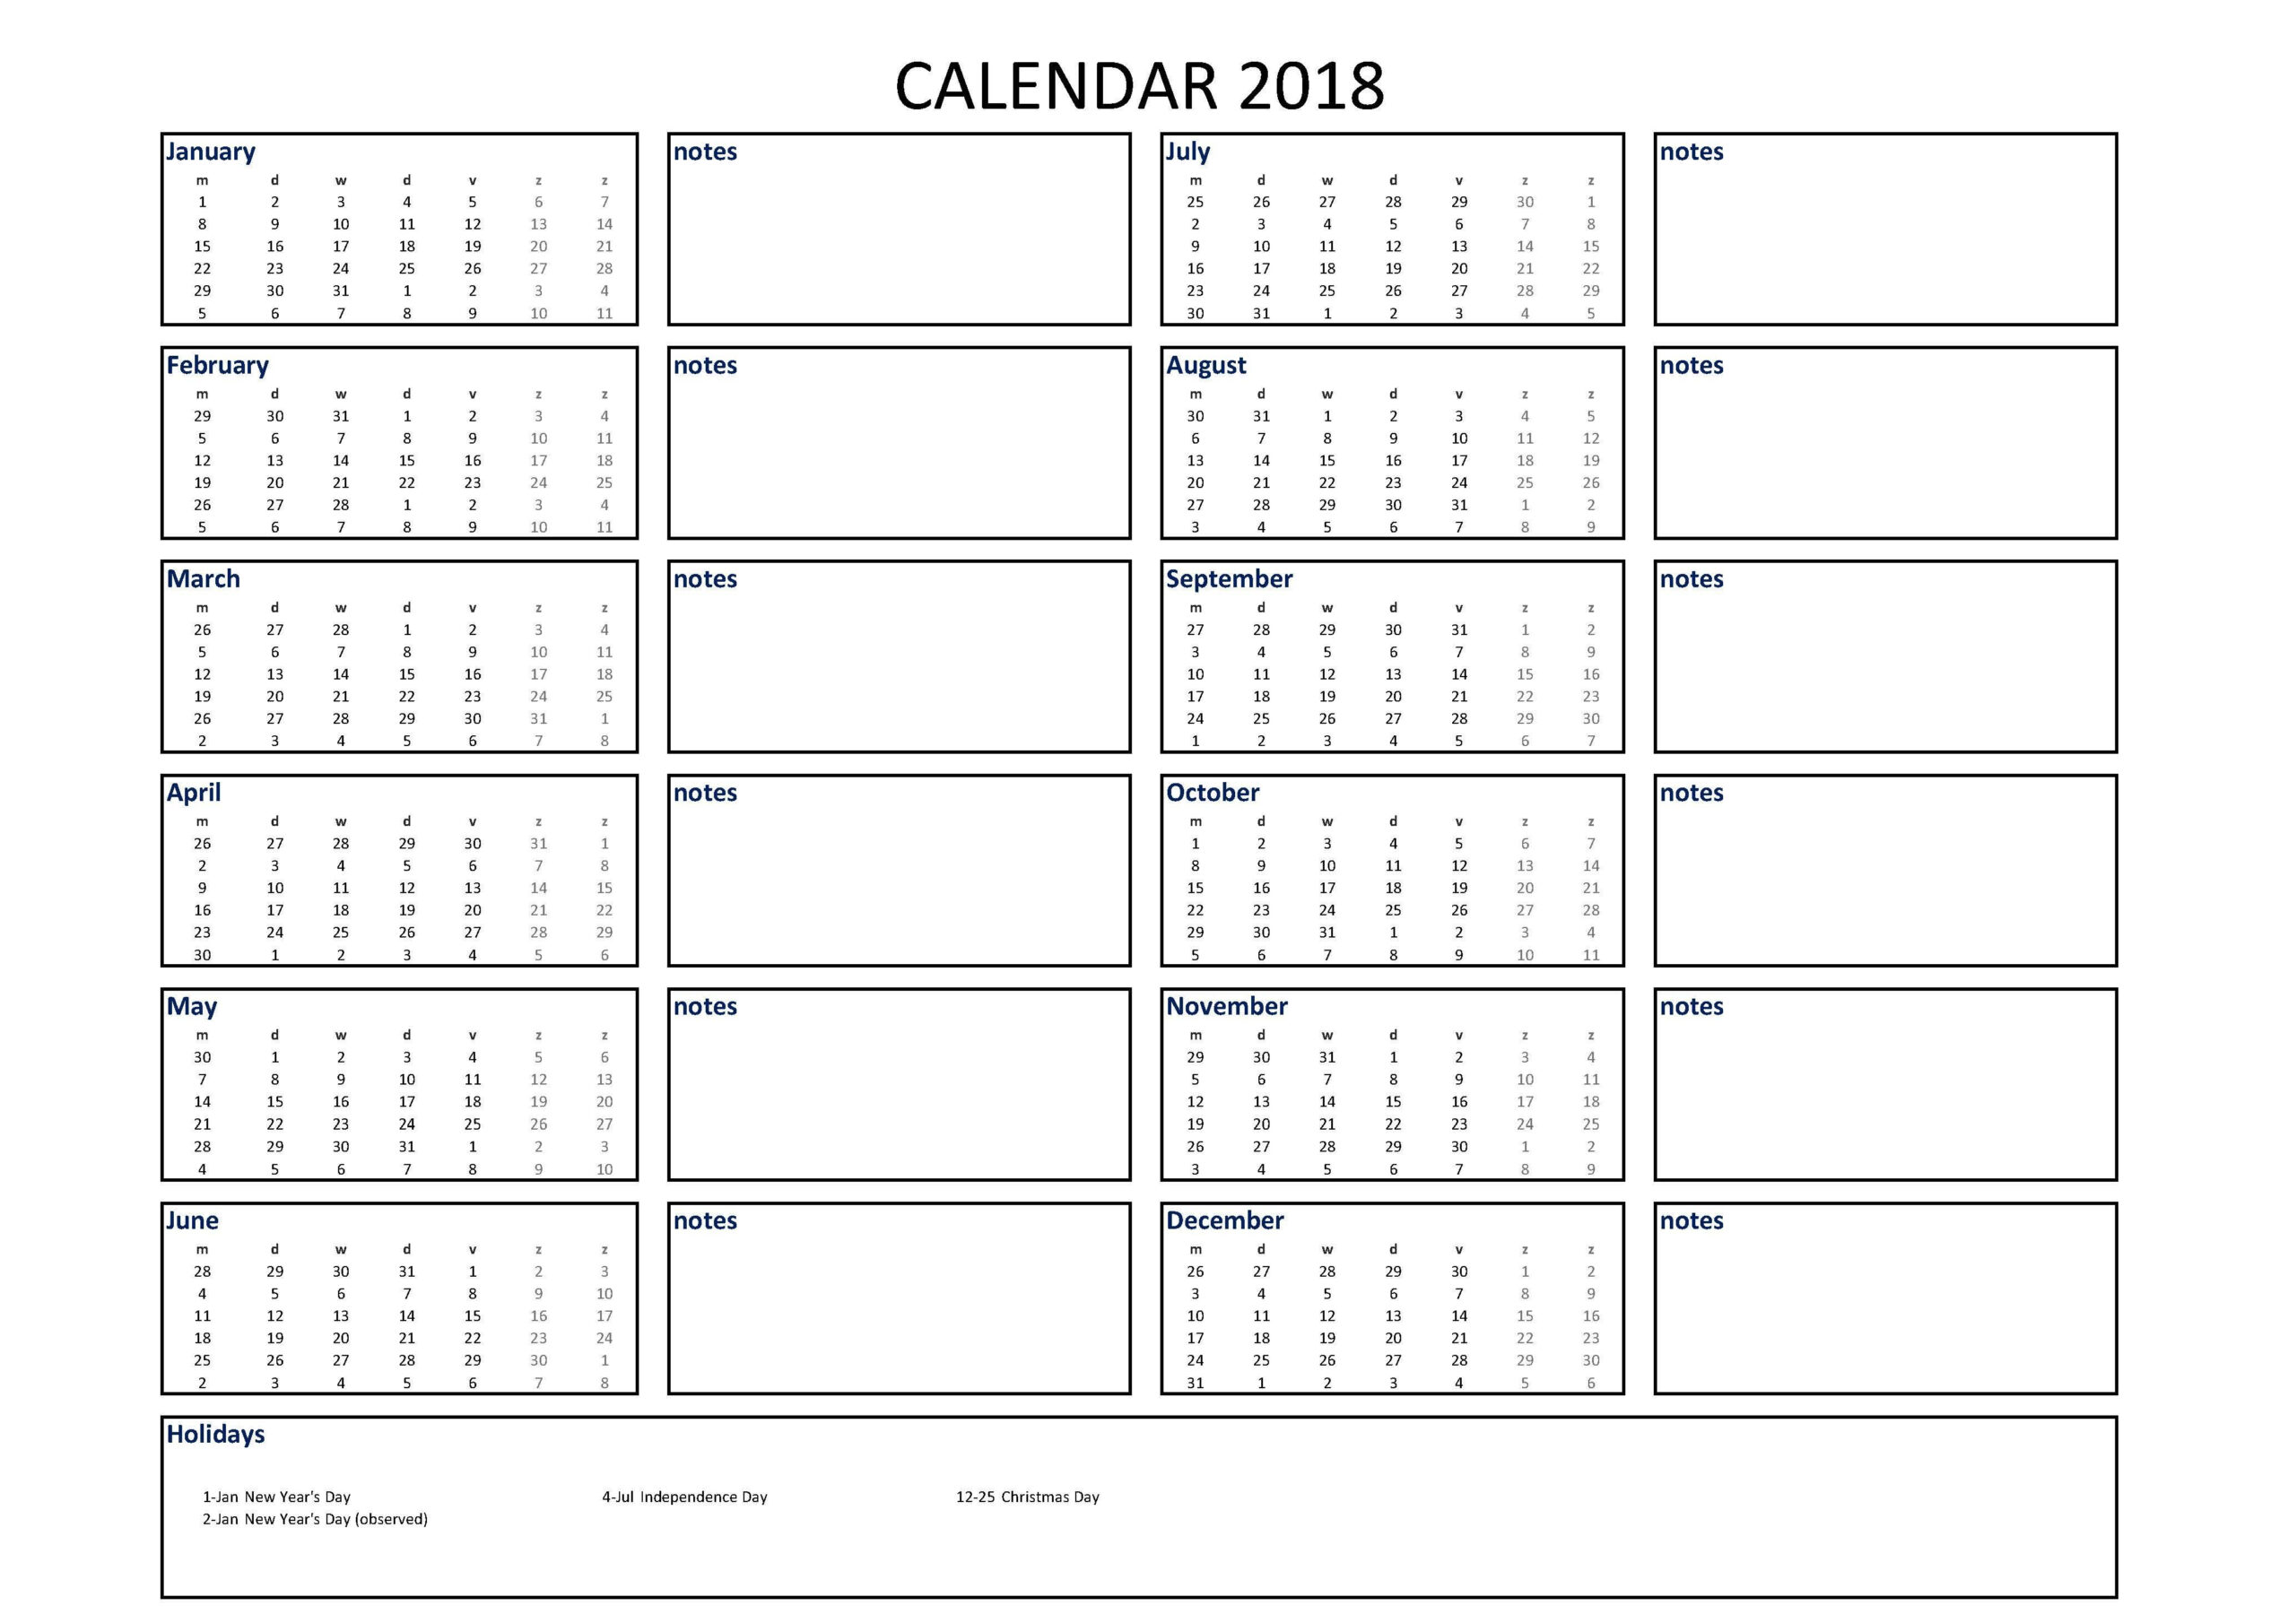 2018 Calendar Excel A4 Size With Notes | Templates At